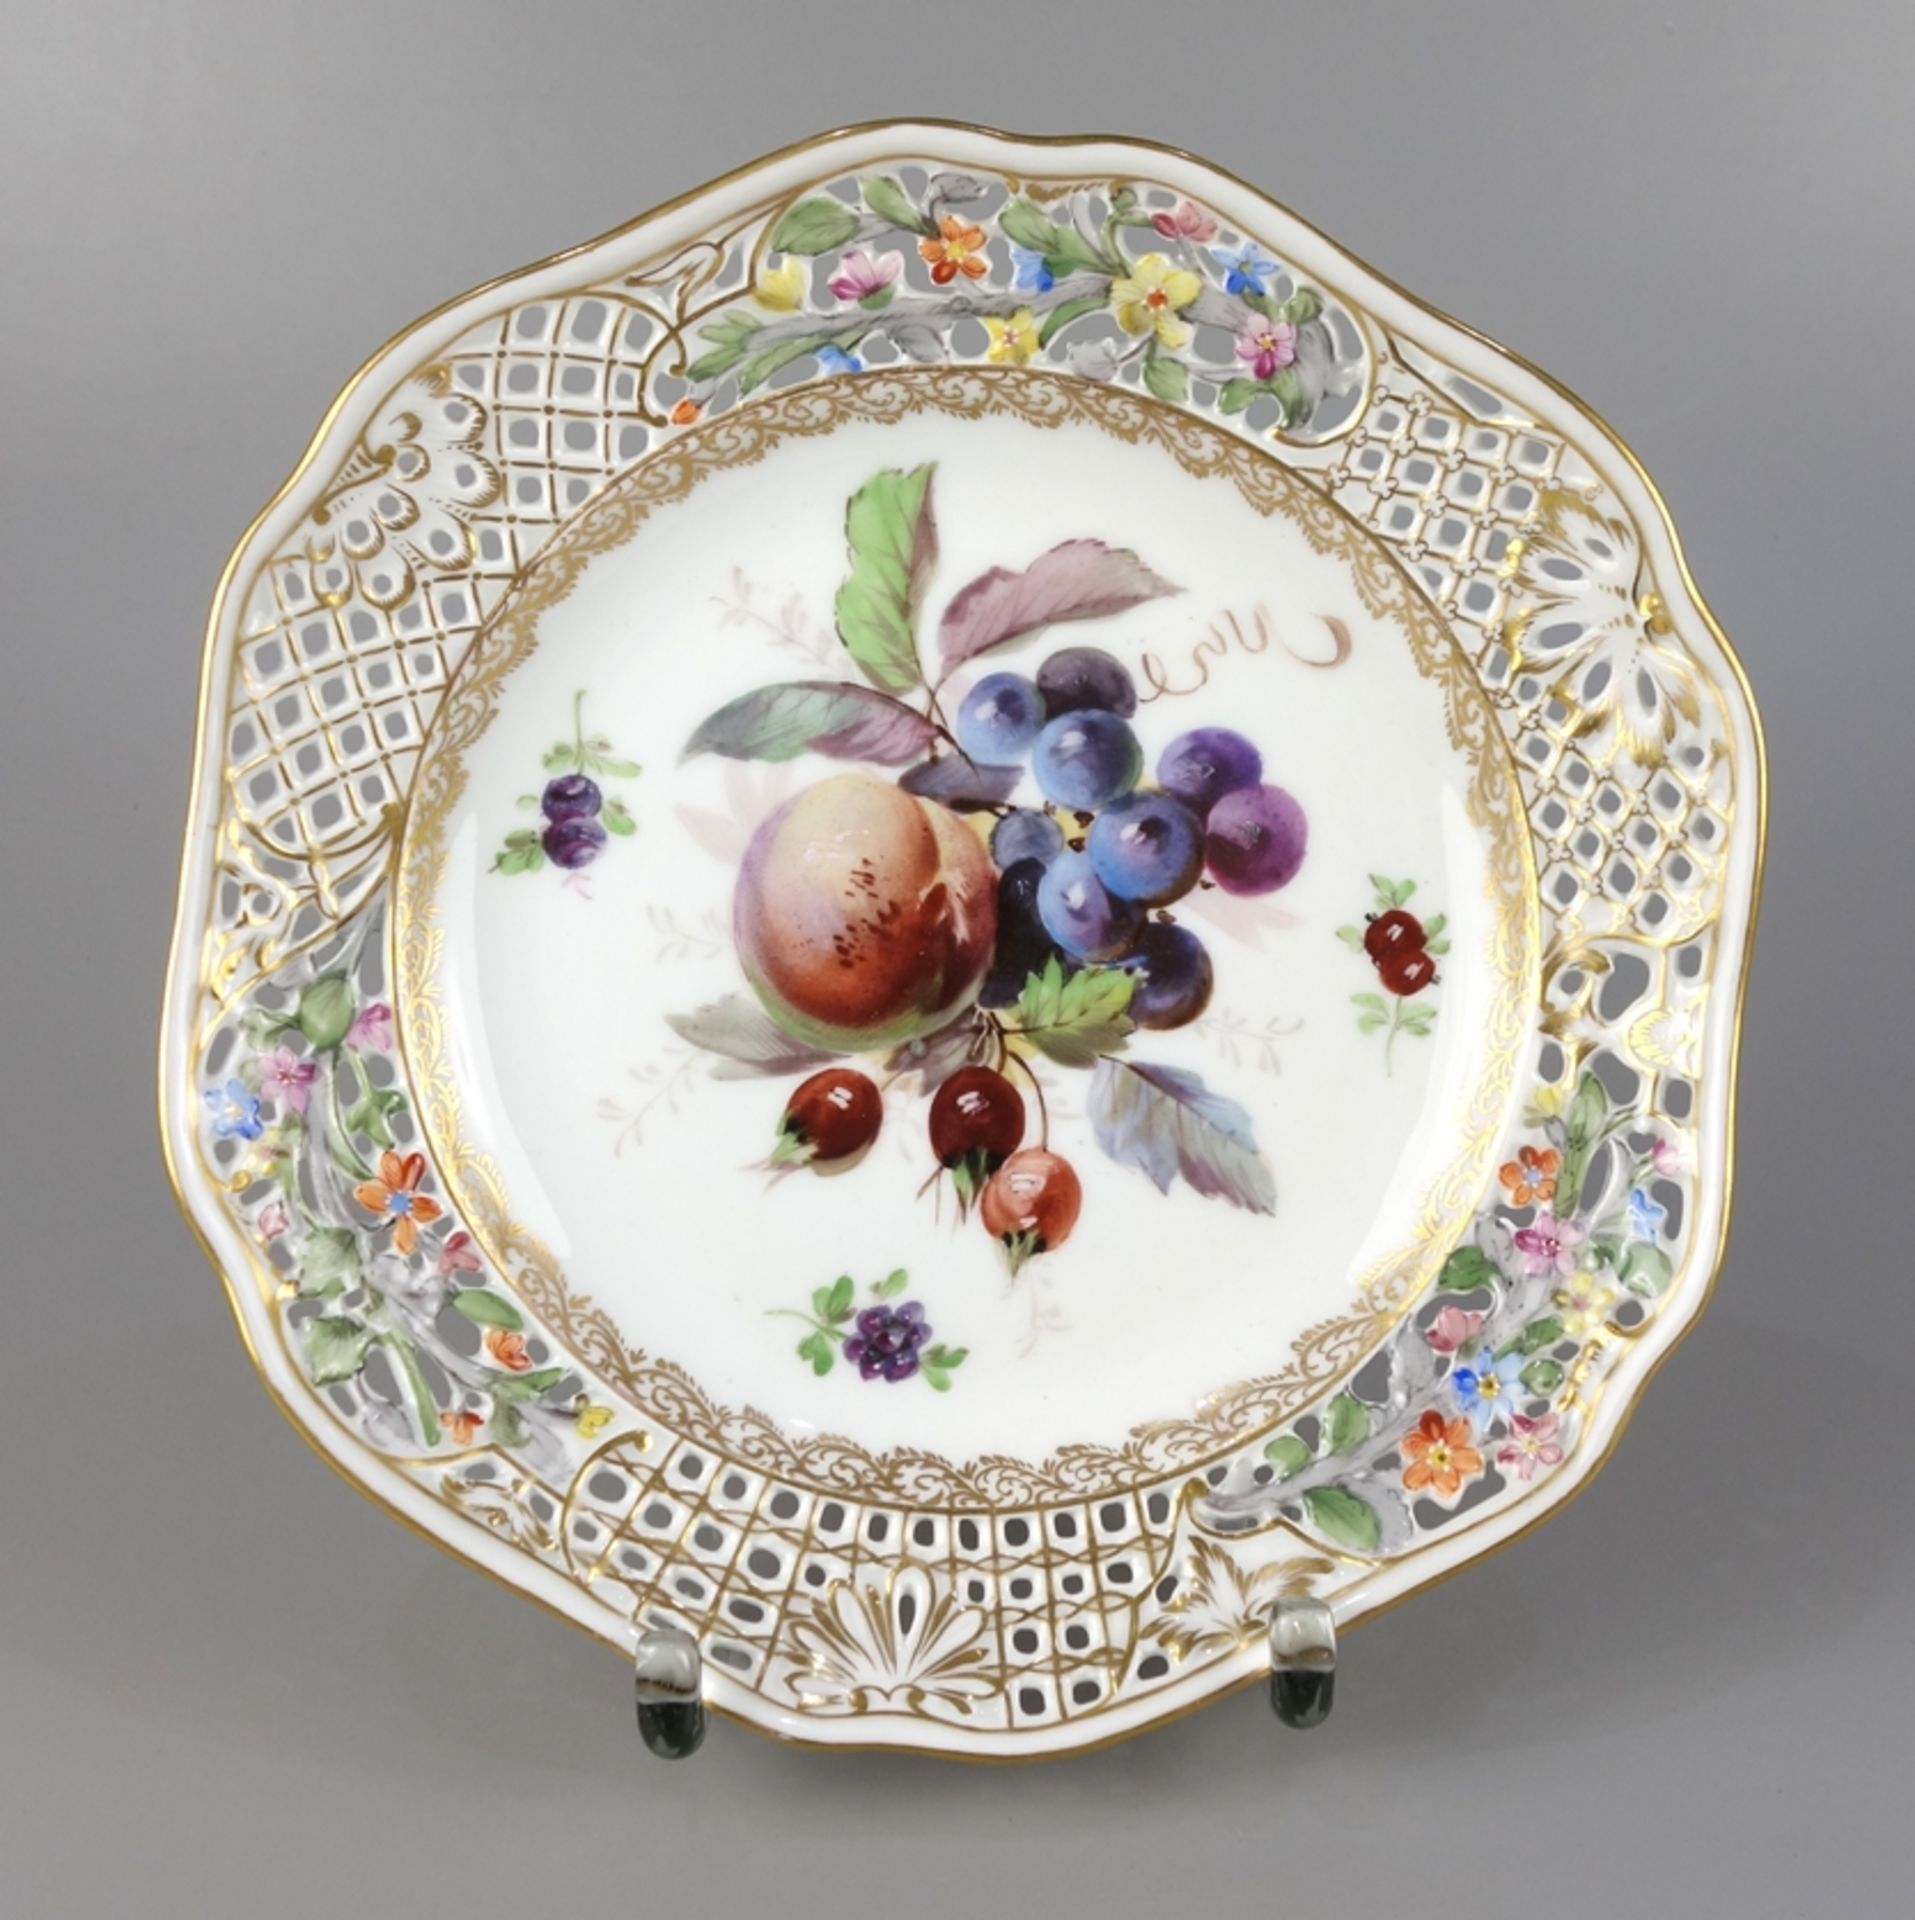 Ornamental plate with openwork flag and fruit decoration, Vienna, end of the 19th century